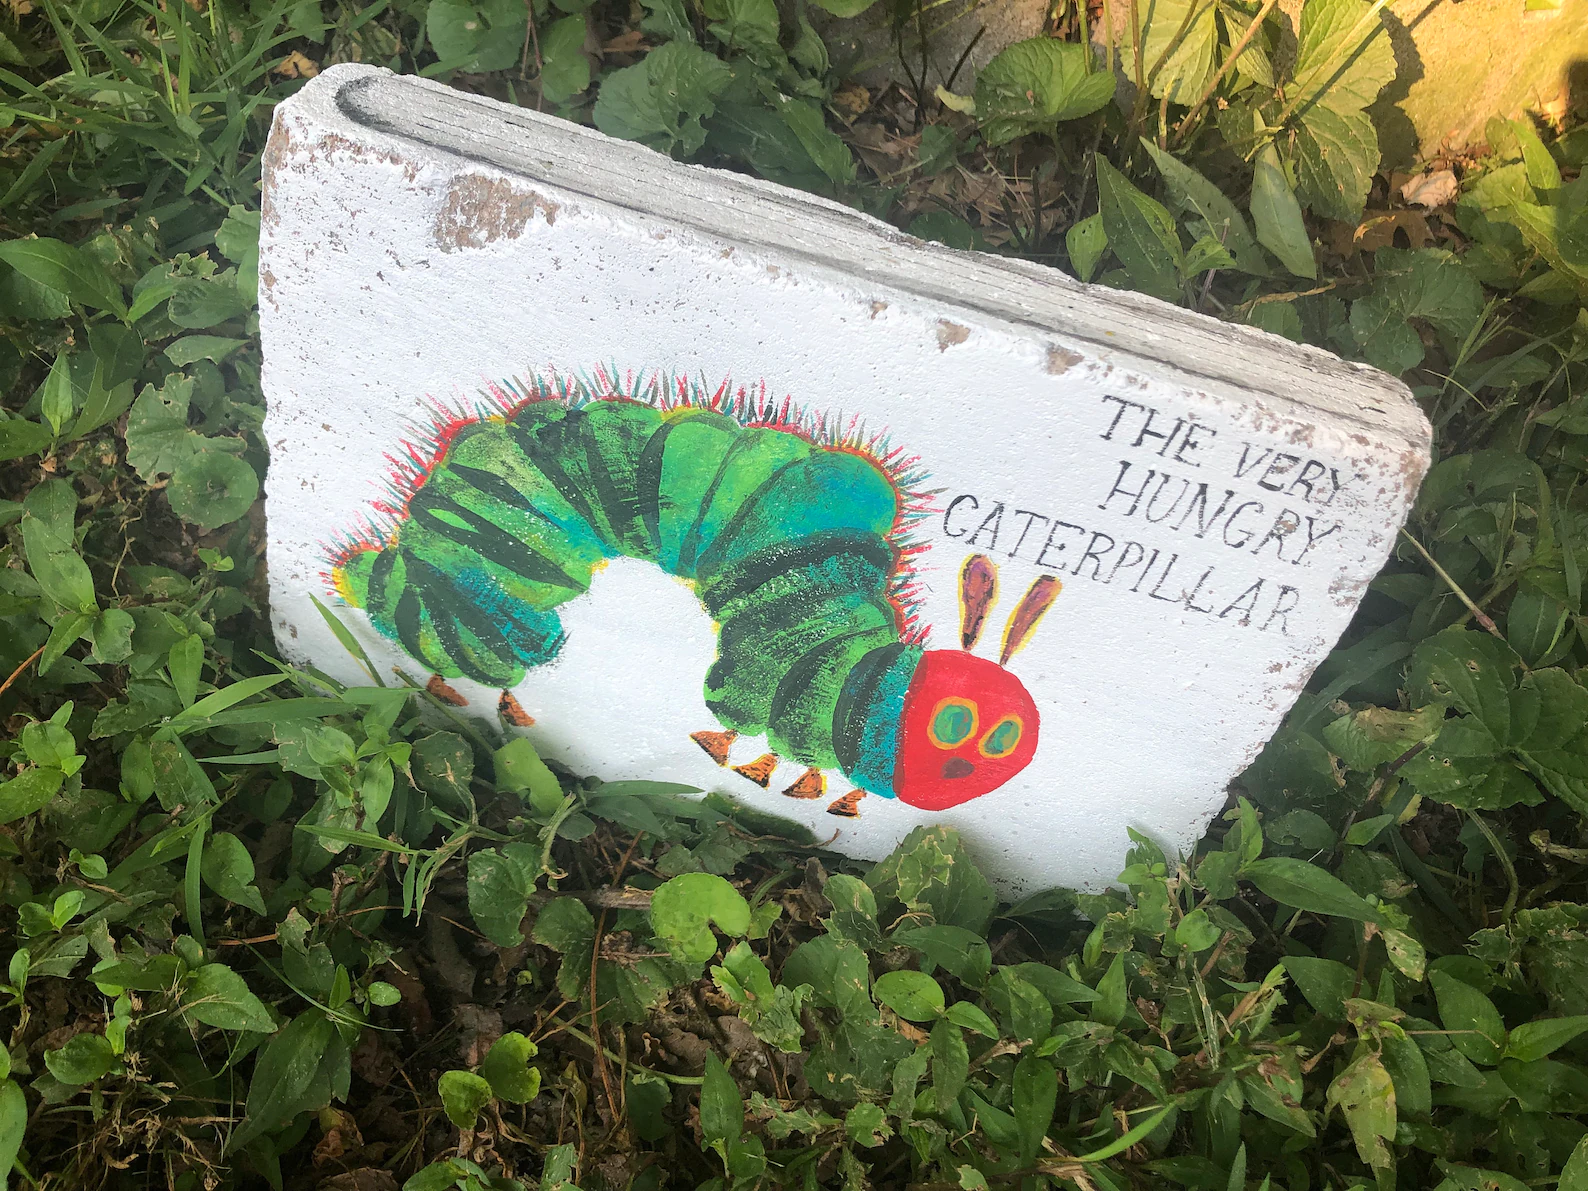 A large flat stone painted to look like the cover of The Very Hungry Caterpillar sits in a small patch of garden.